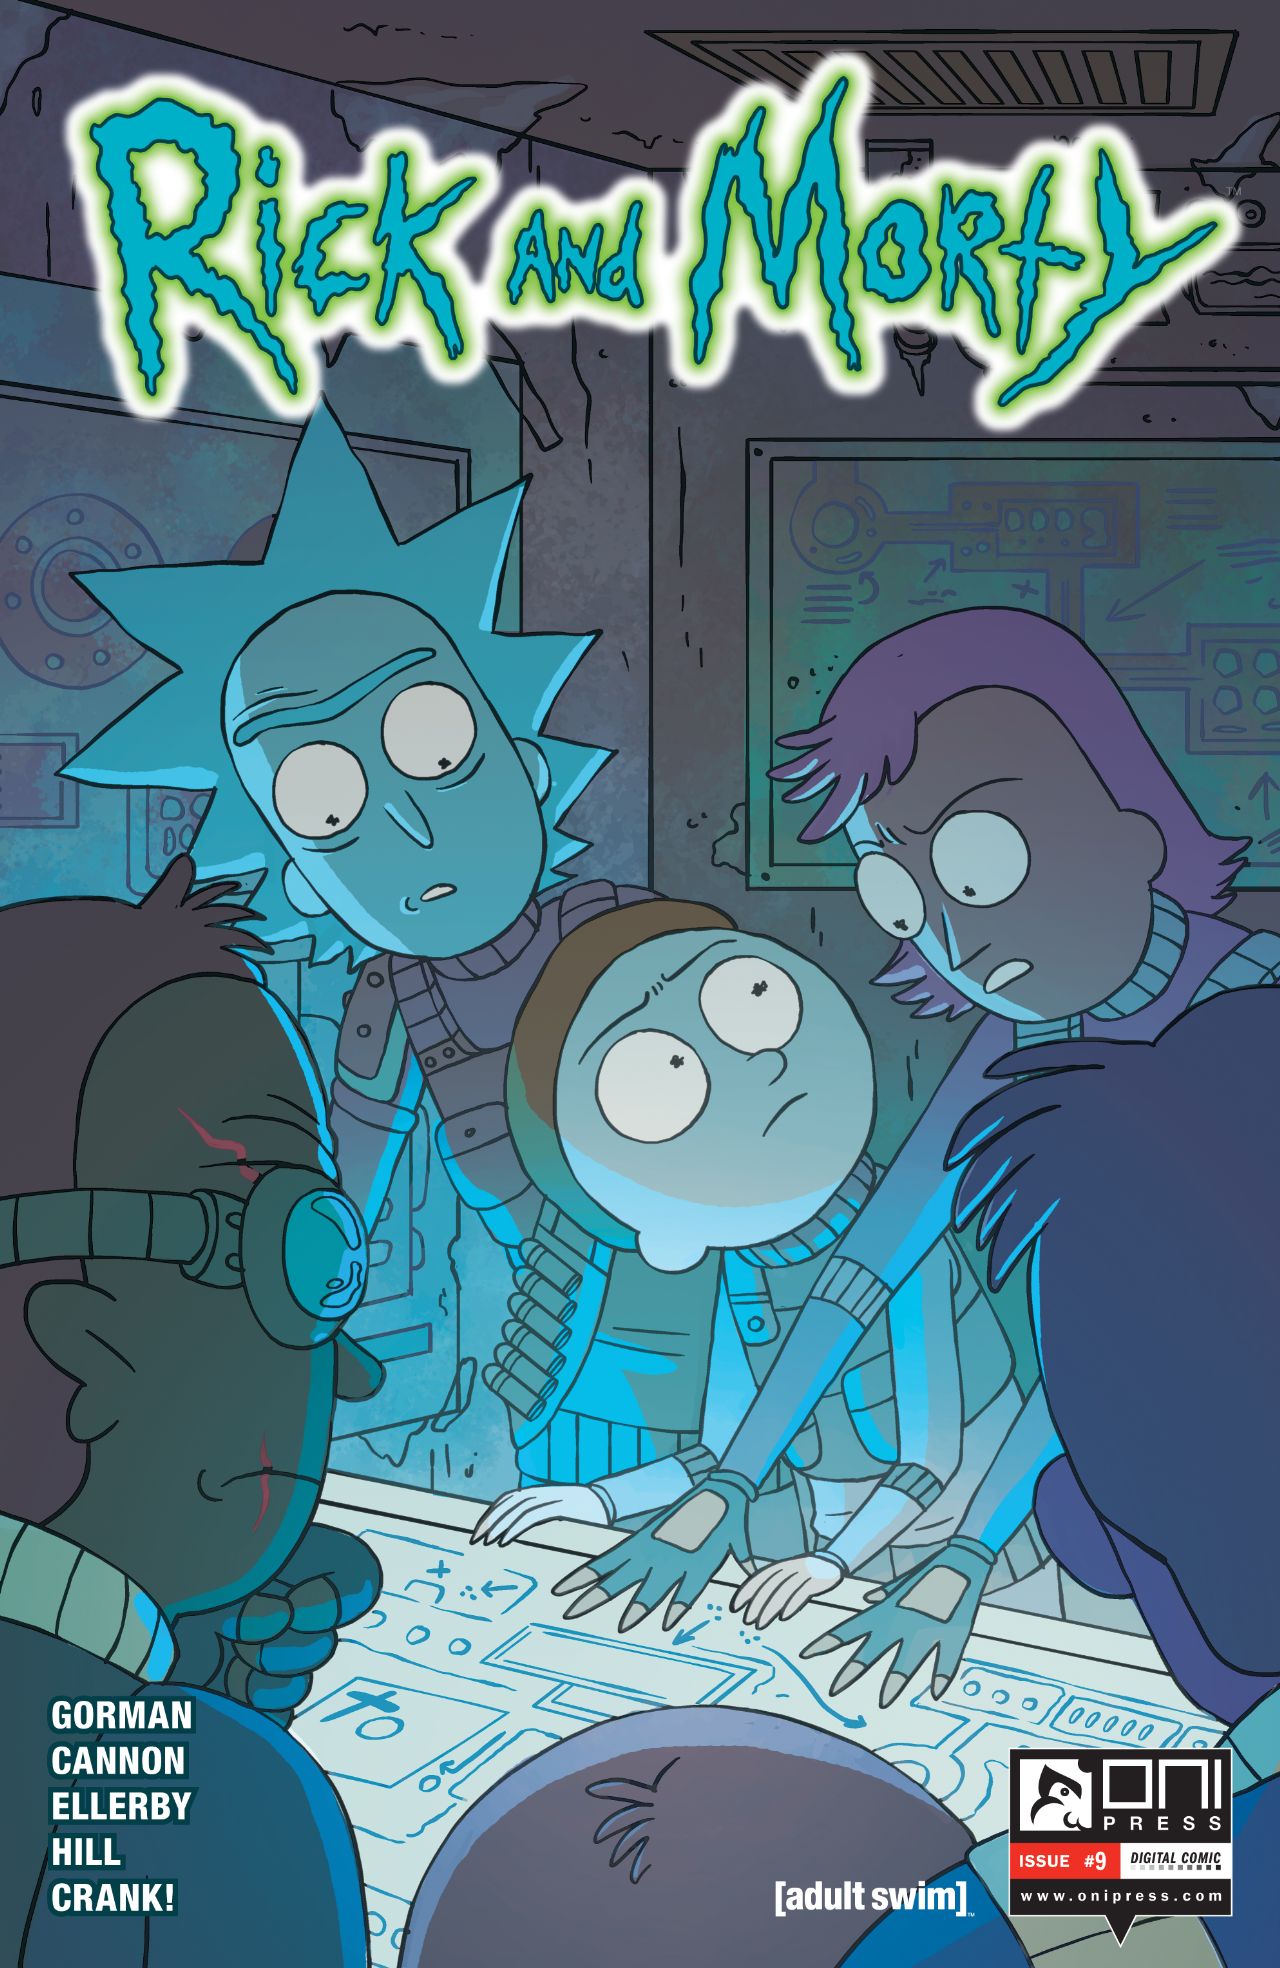 Rick And Morty Issue 9 Rick And Morty Wiki Fandom Powered By Wikia